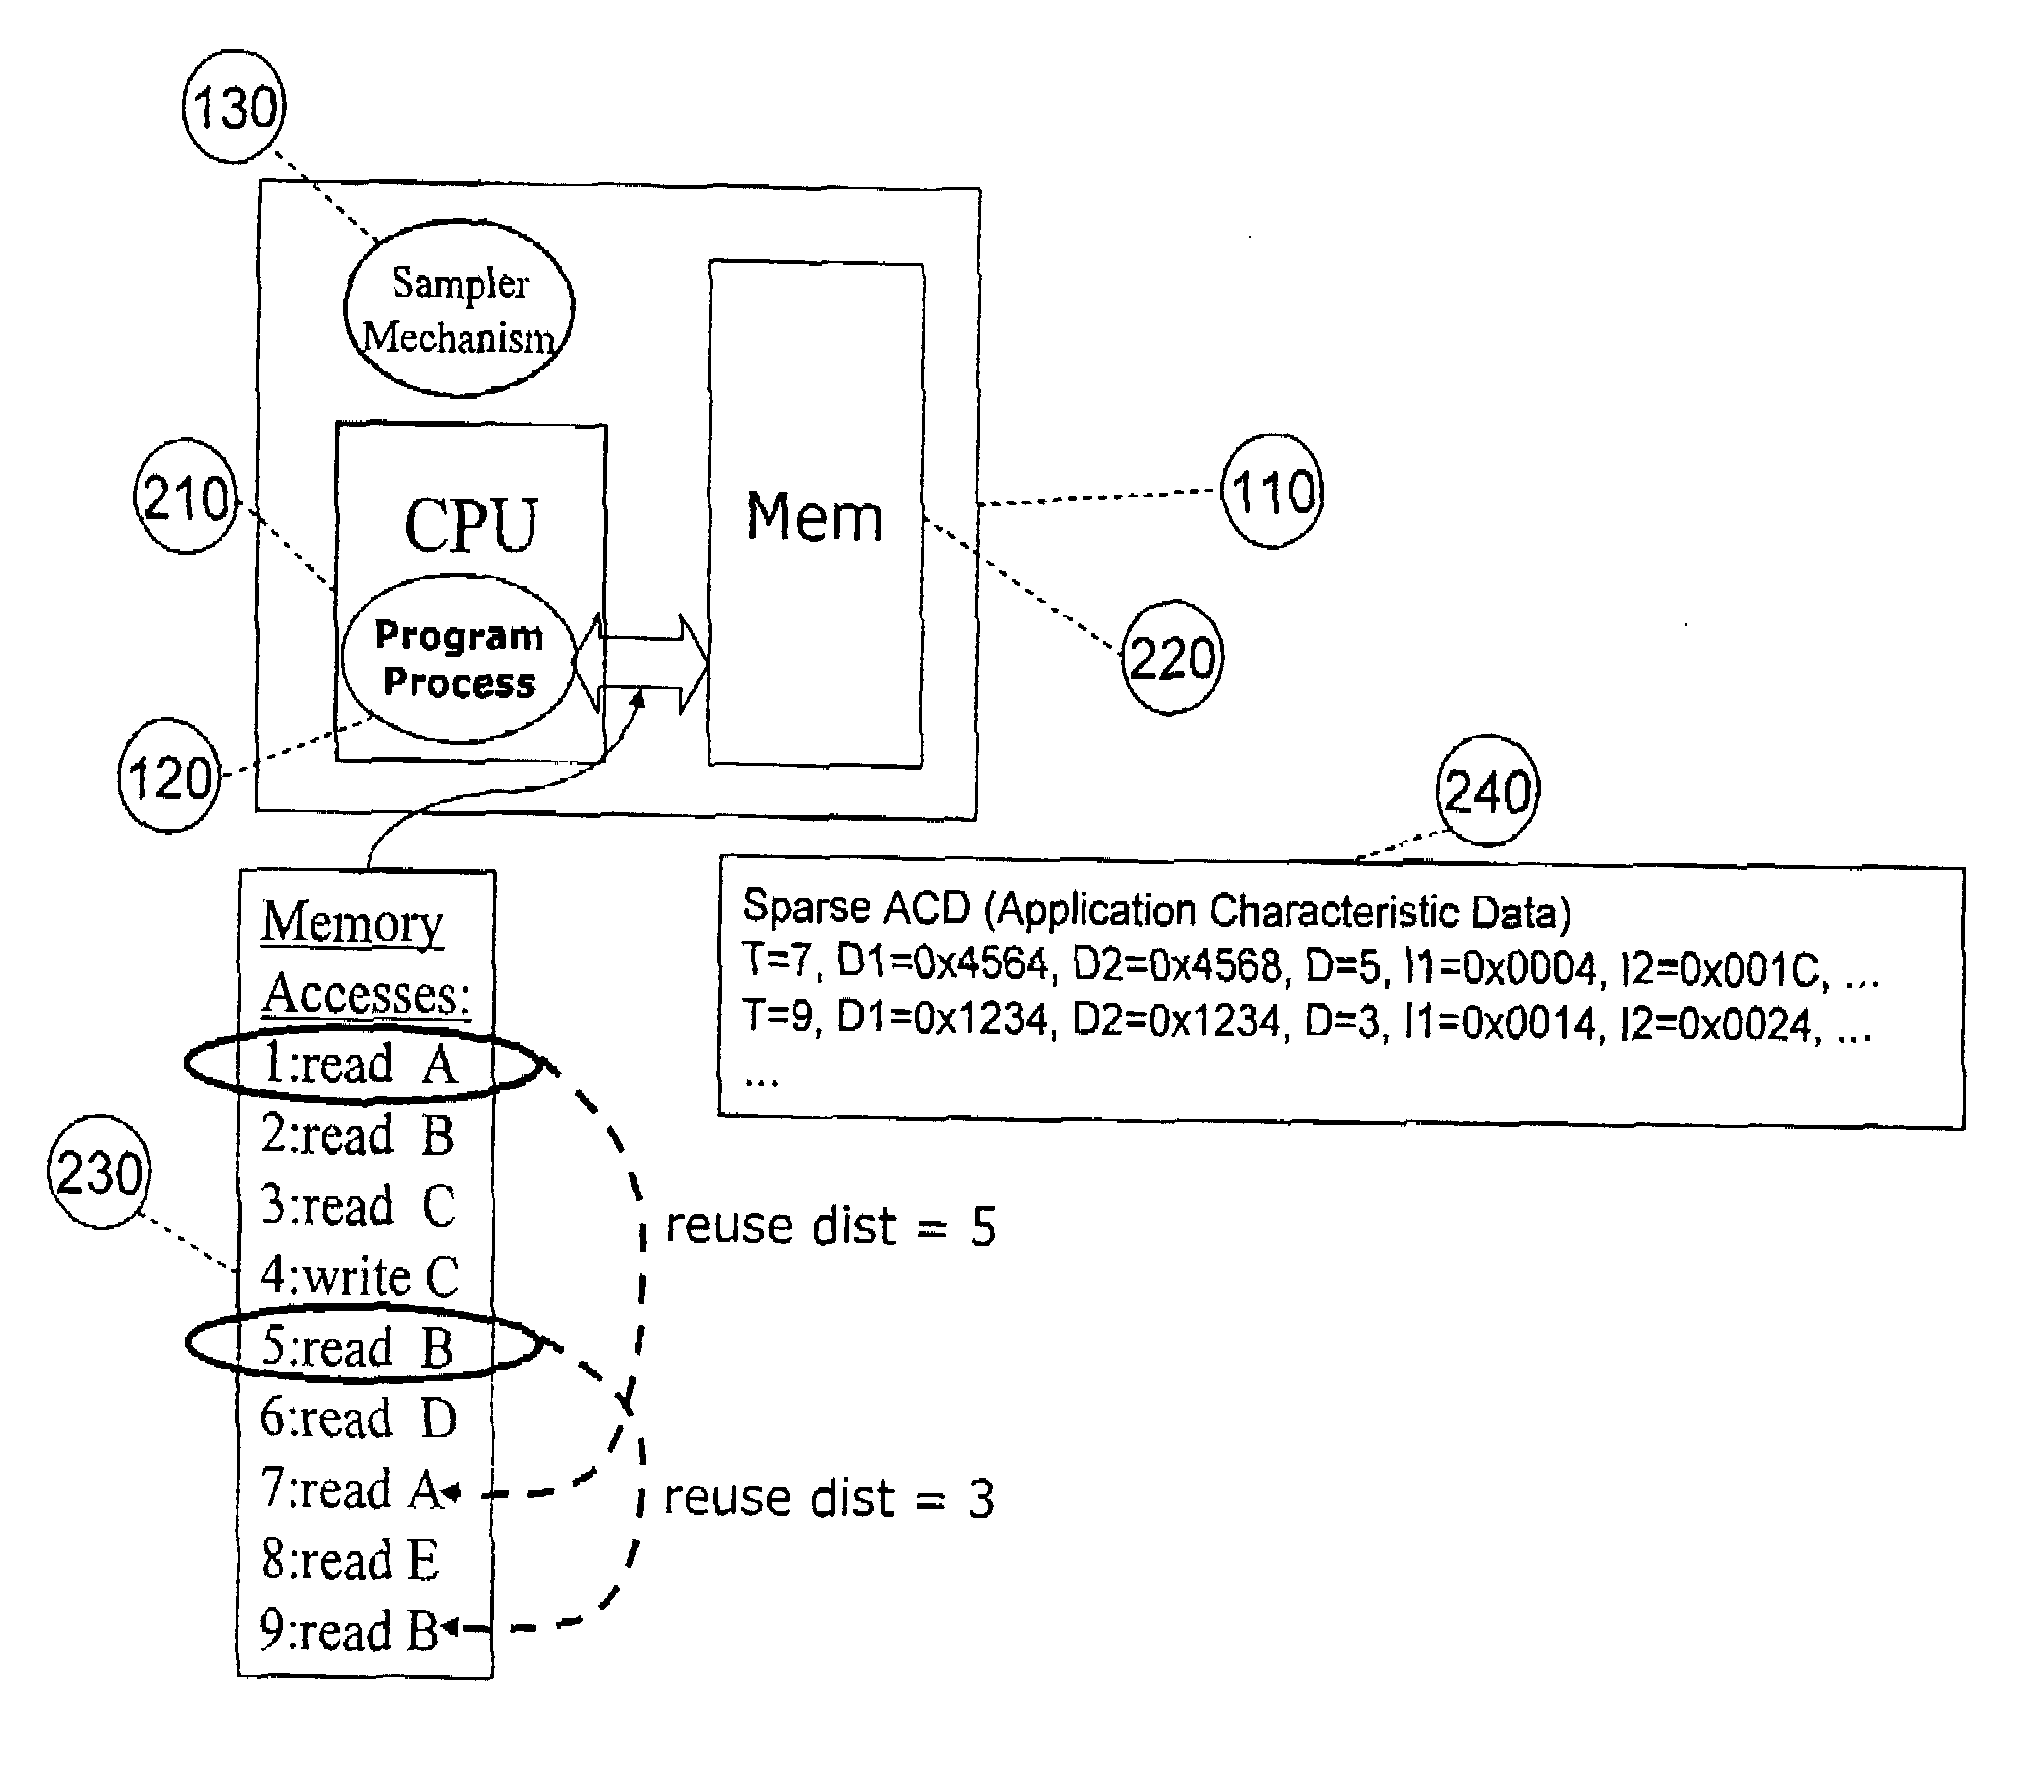 System for and method of capturing performance characteristics data from a computer system and modeling target system performance